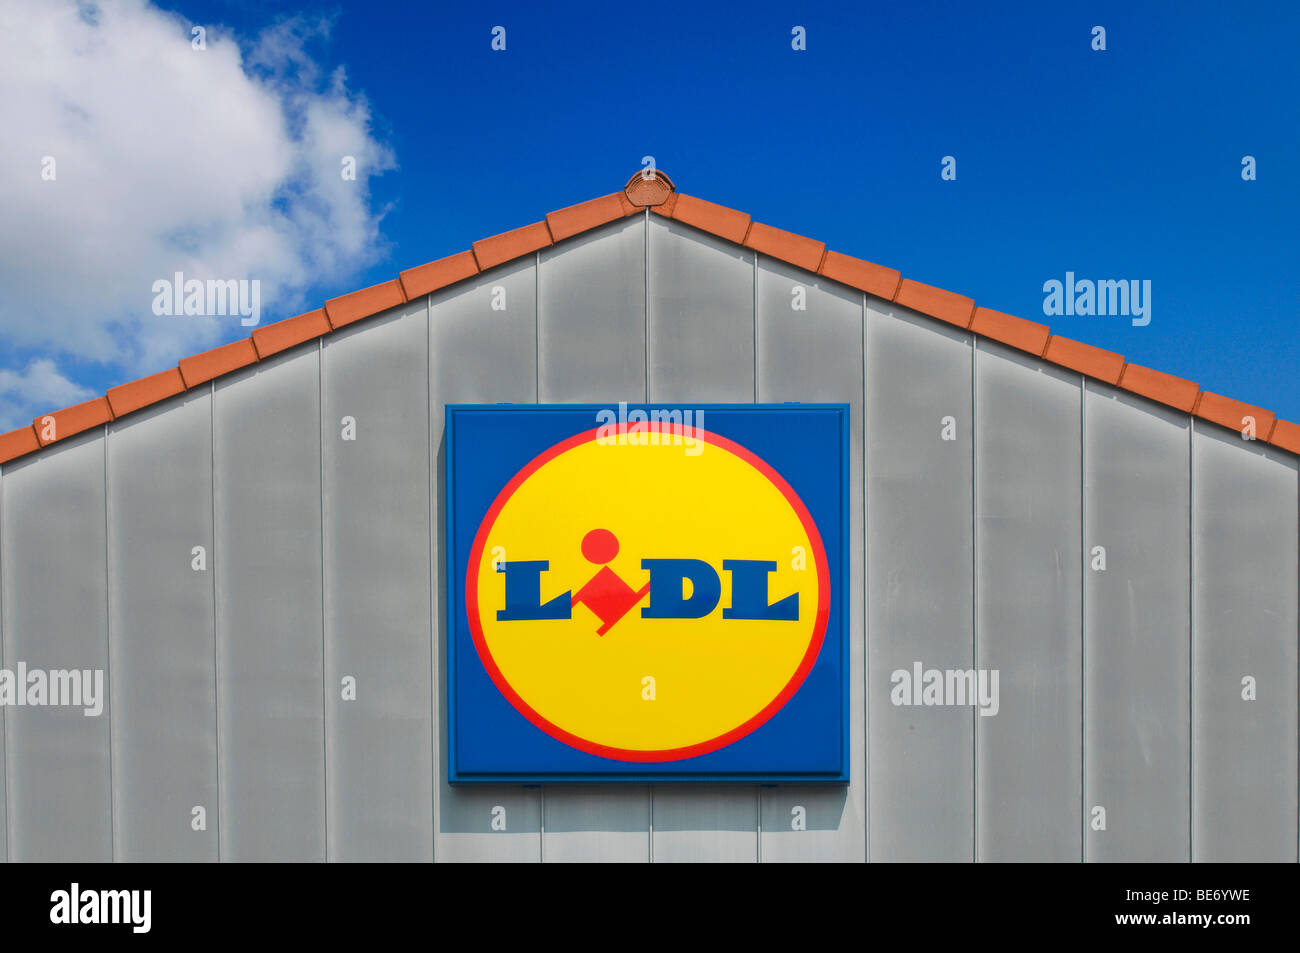 Roof ridge of a Lidl store with the Lidl logo Stock Photo